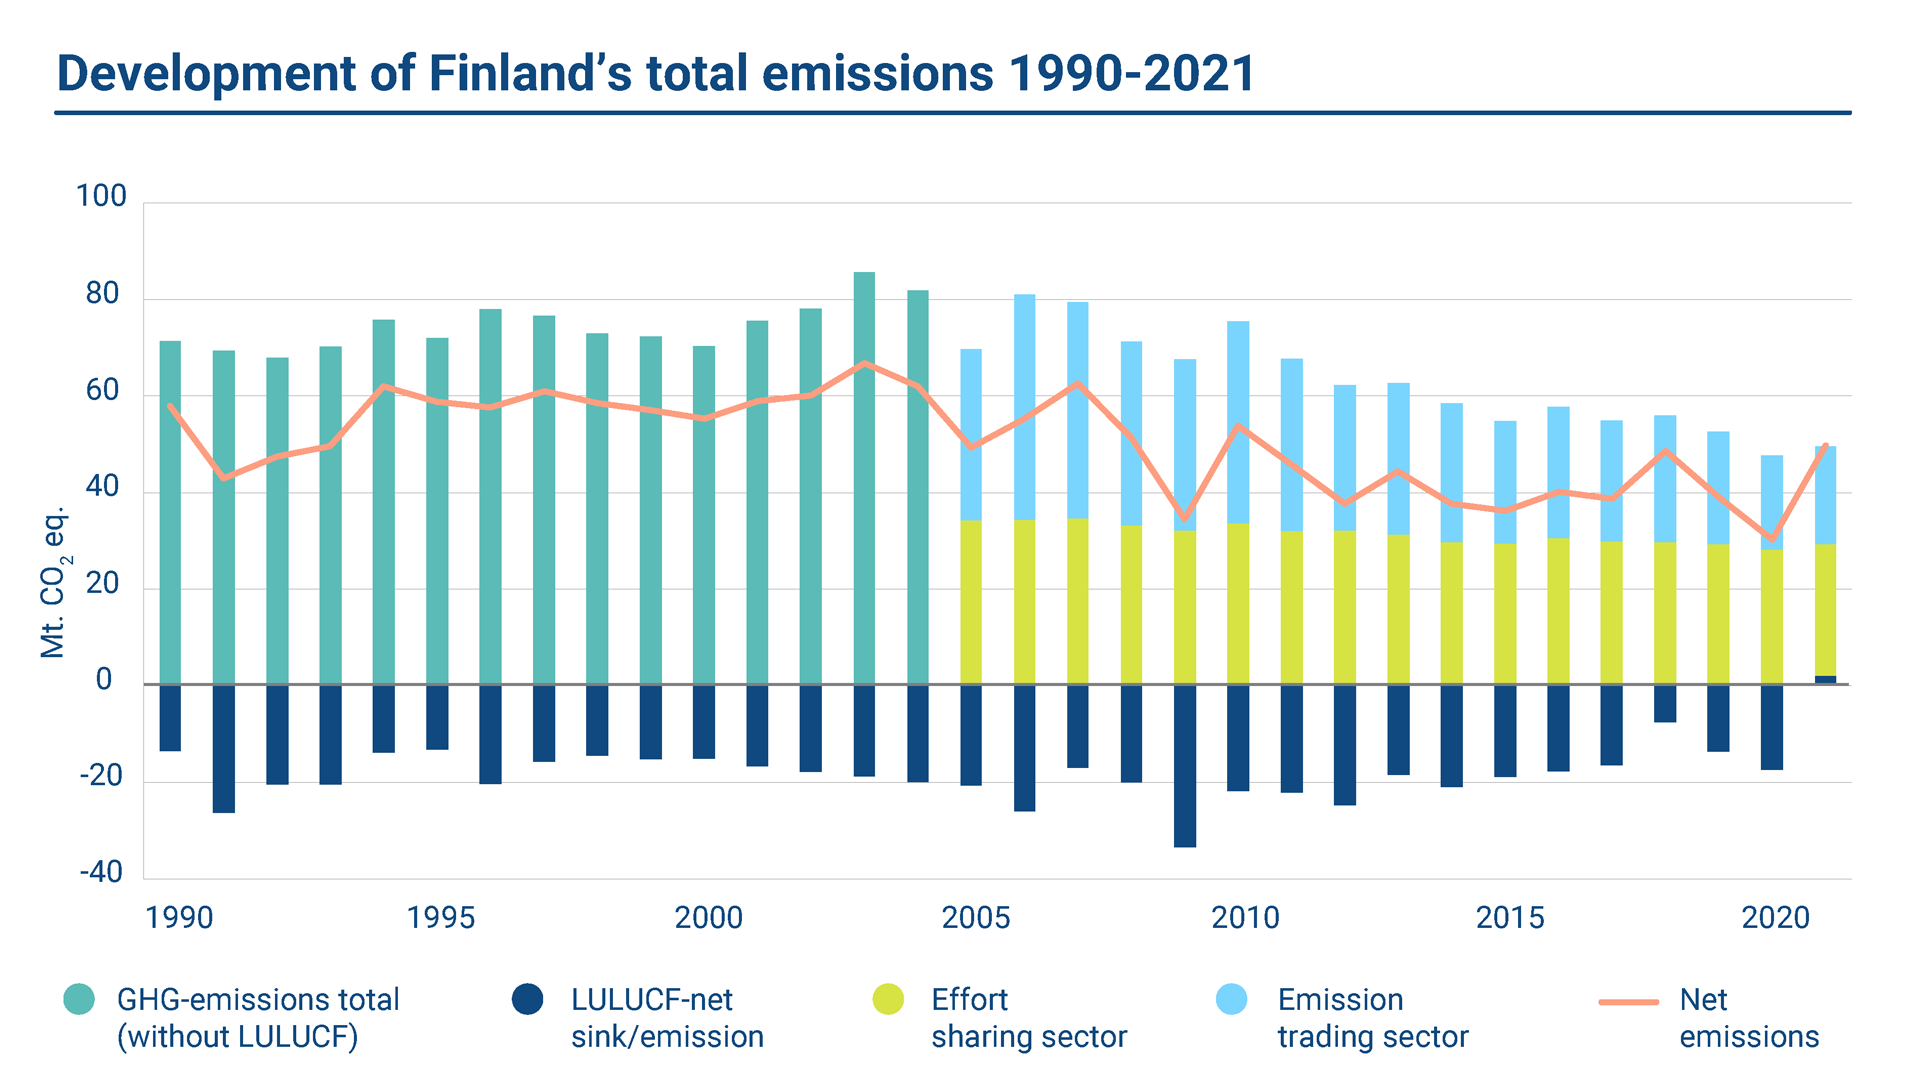 The graph shows the development of Finland's total emissions 1990-2021.